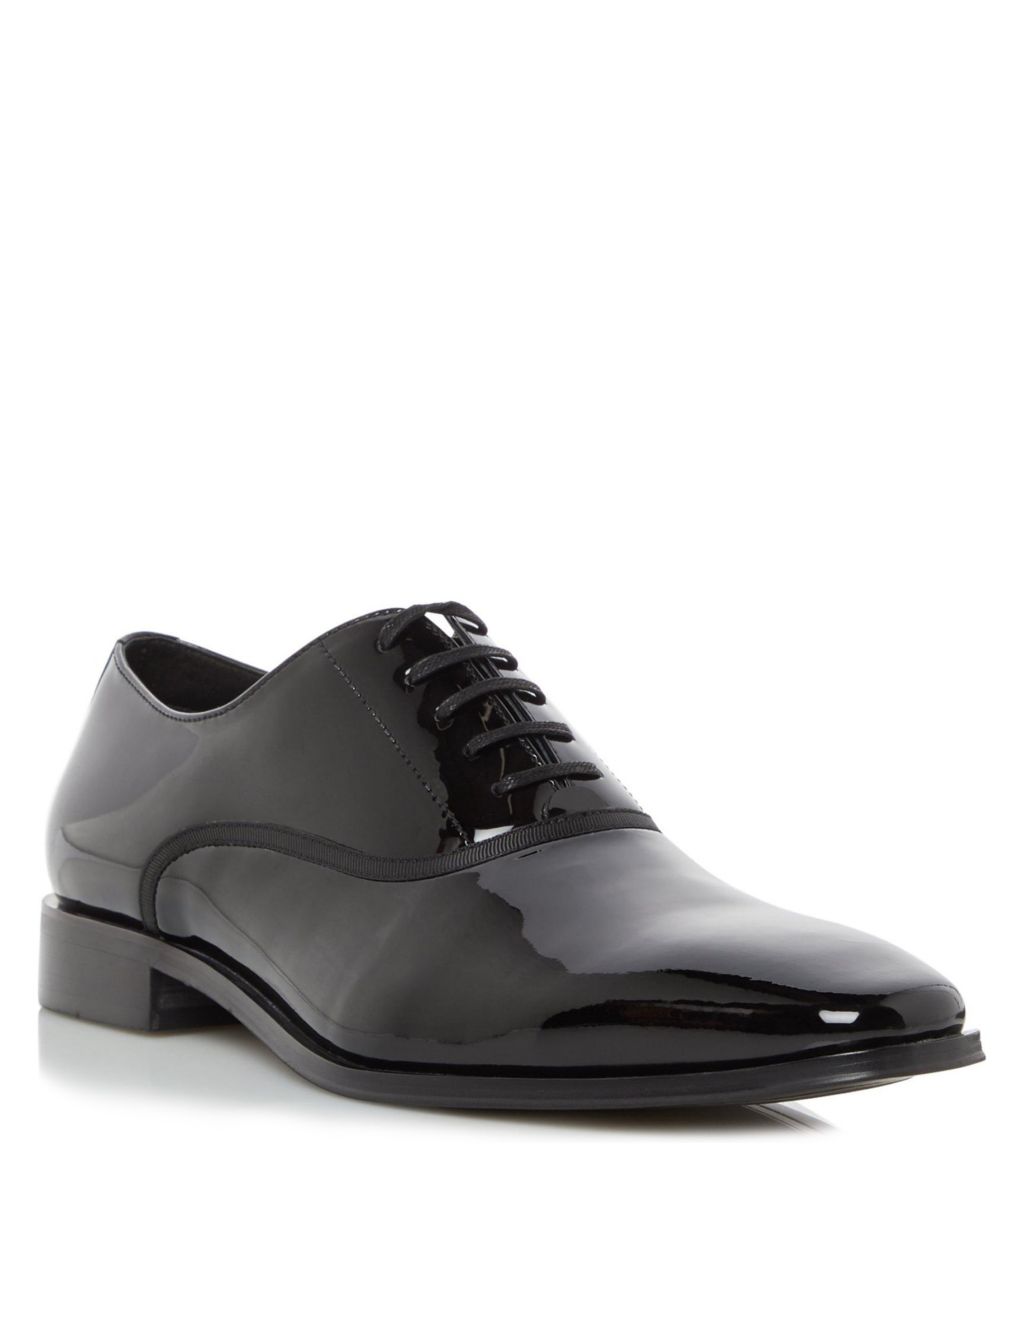 Patent Leather Oxford Shoes image 2